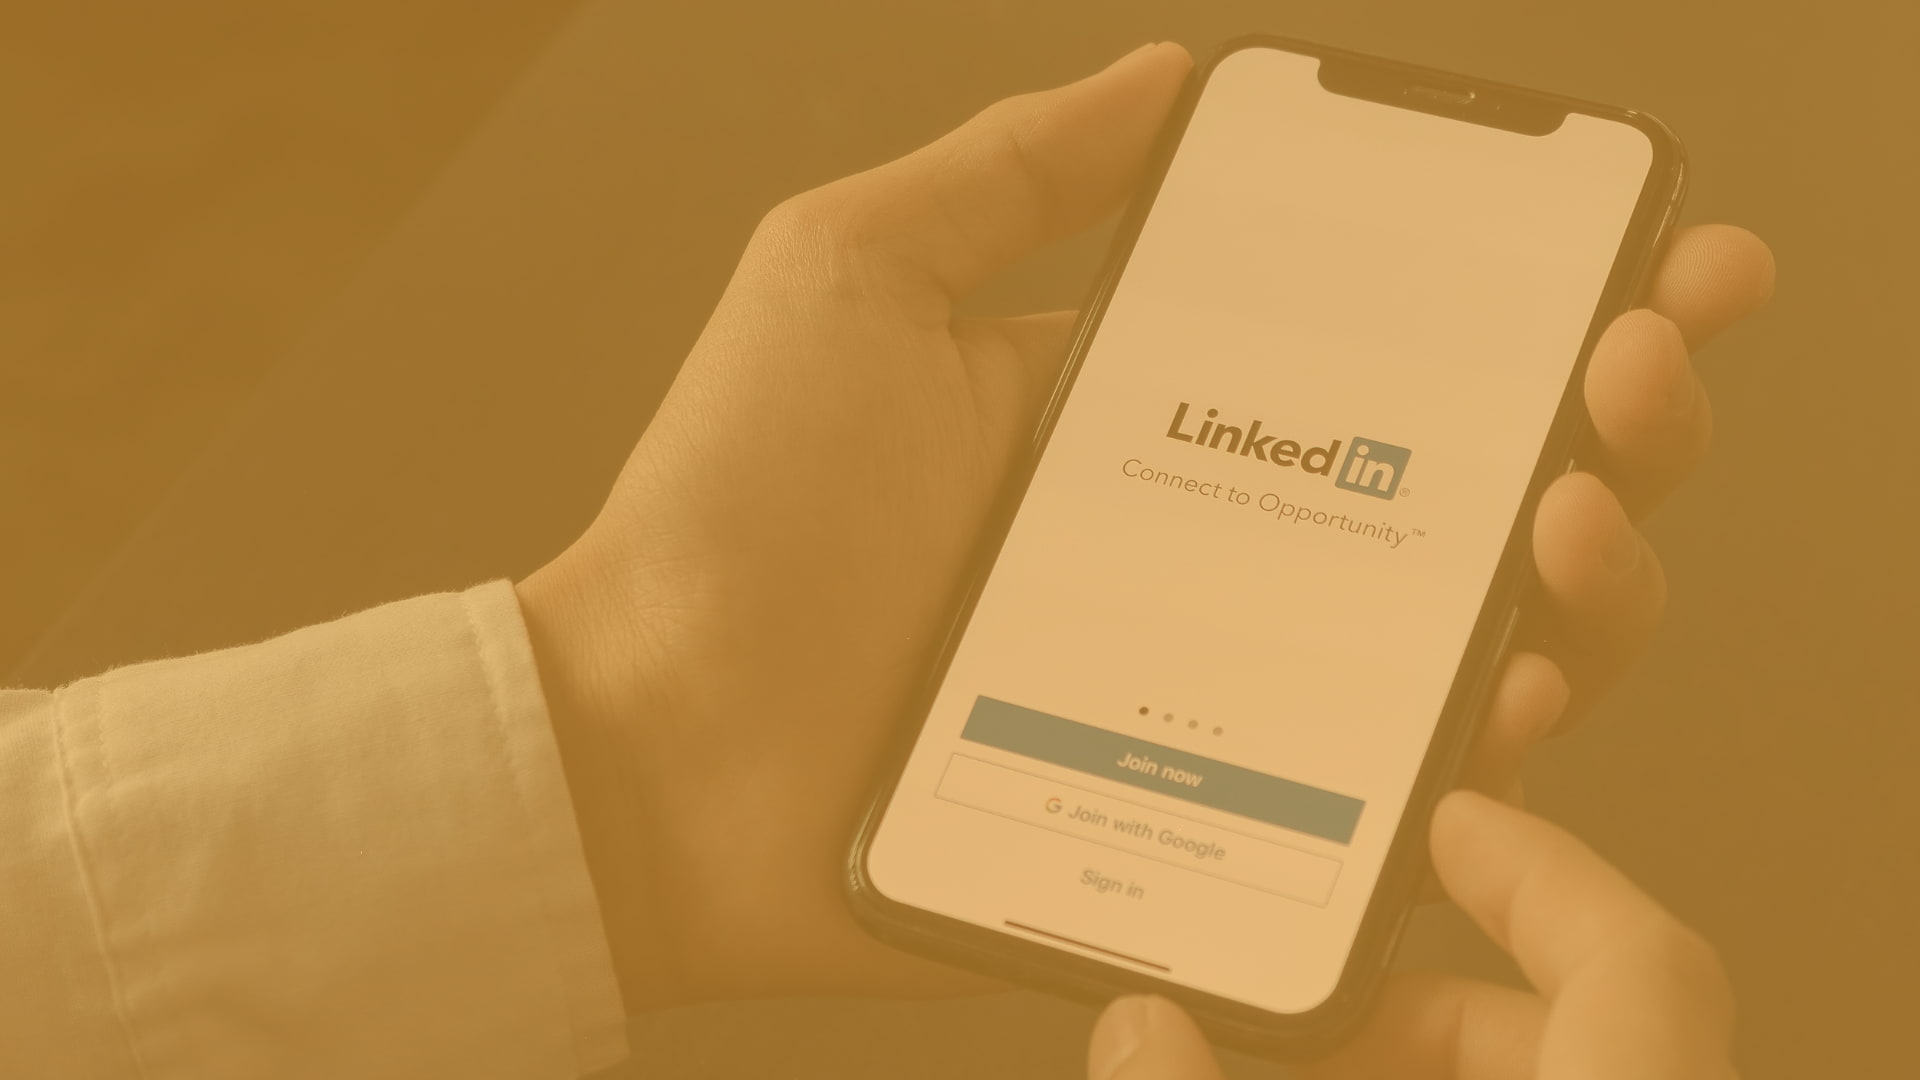 LinkedIn Newsletter - Is It Worth Including in Your Marketing Efforts? (+10 Content Ideas)